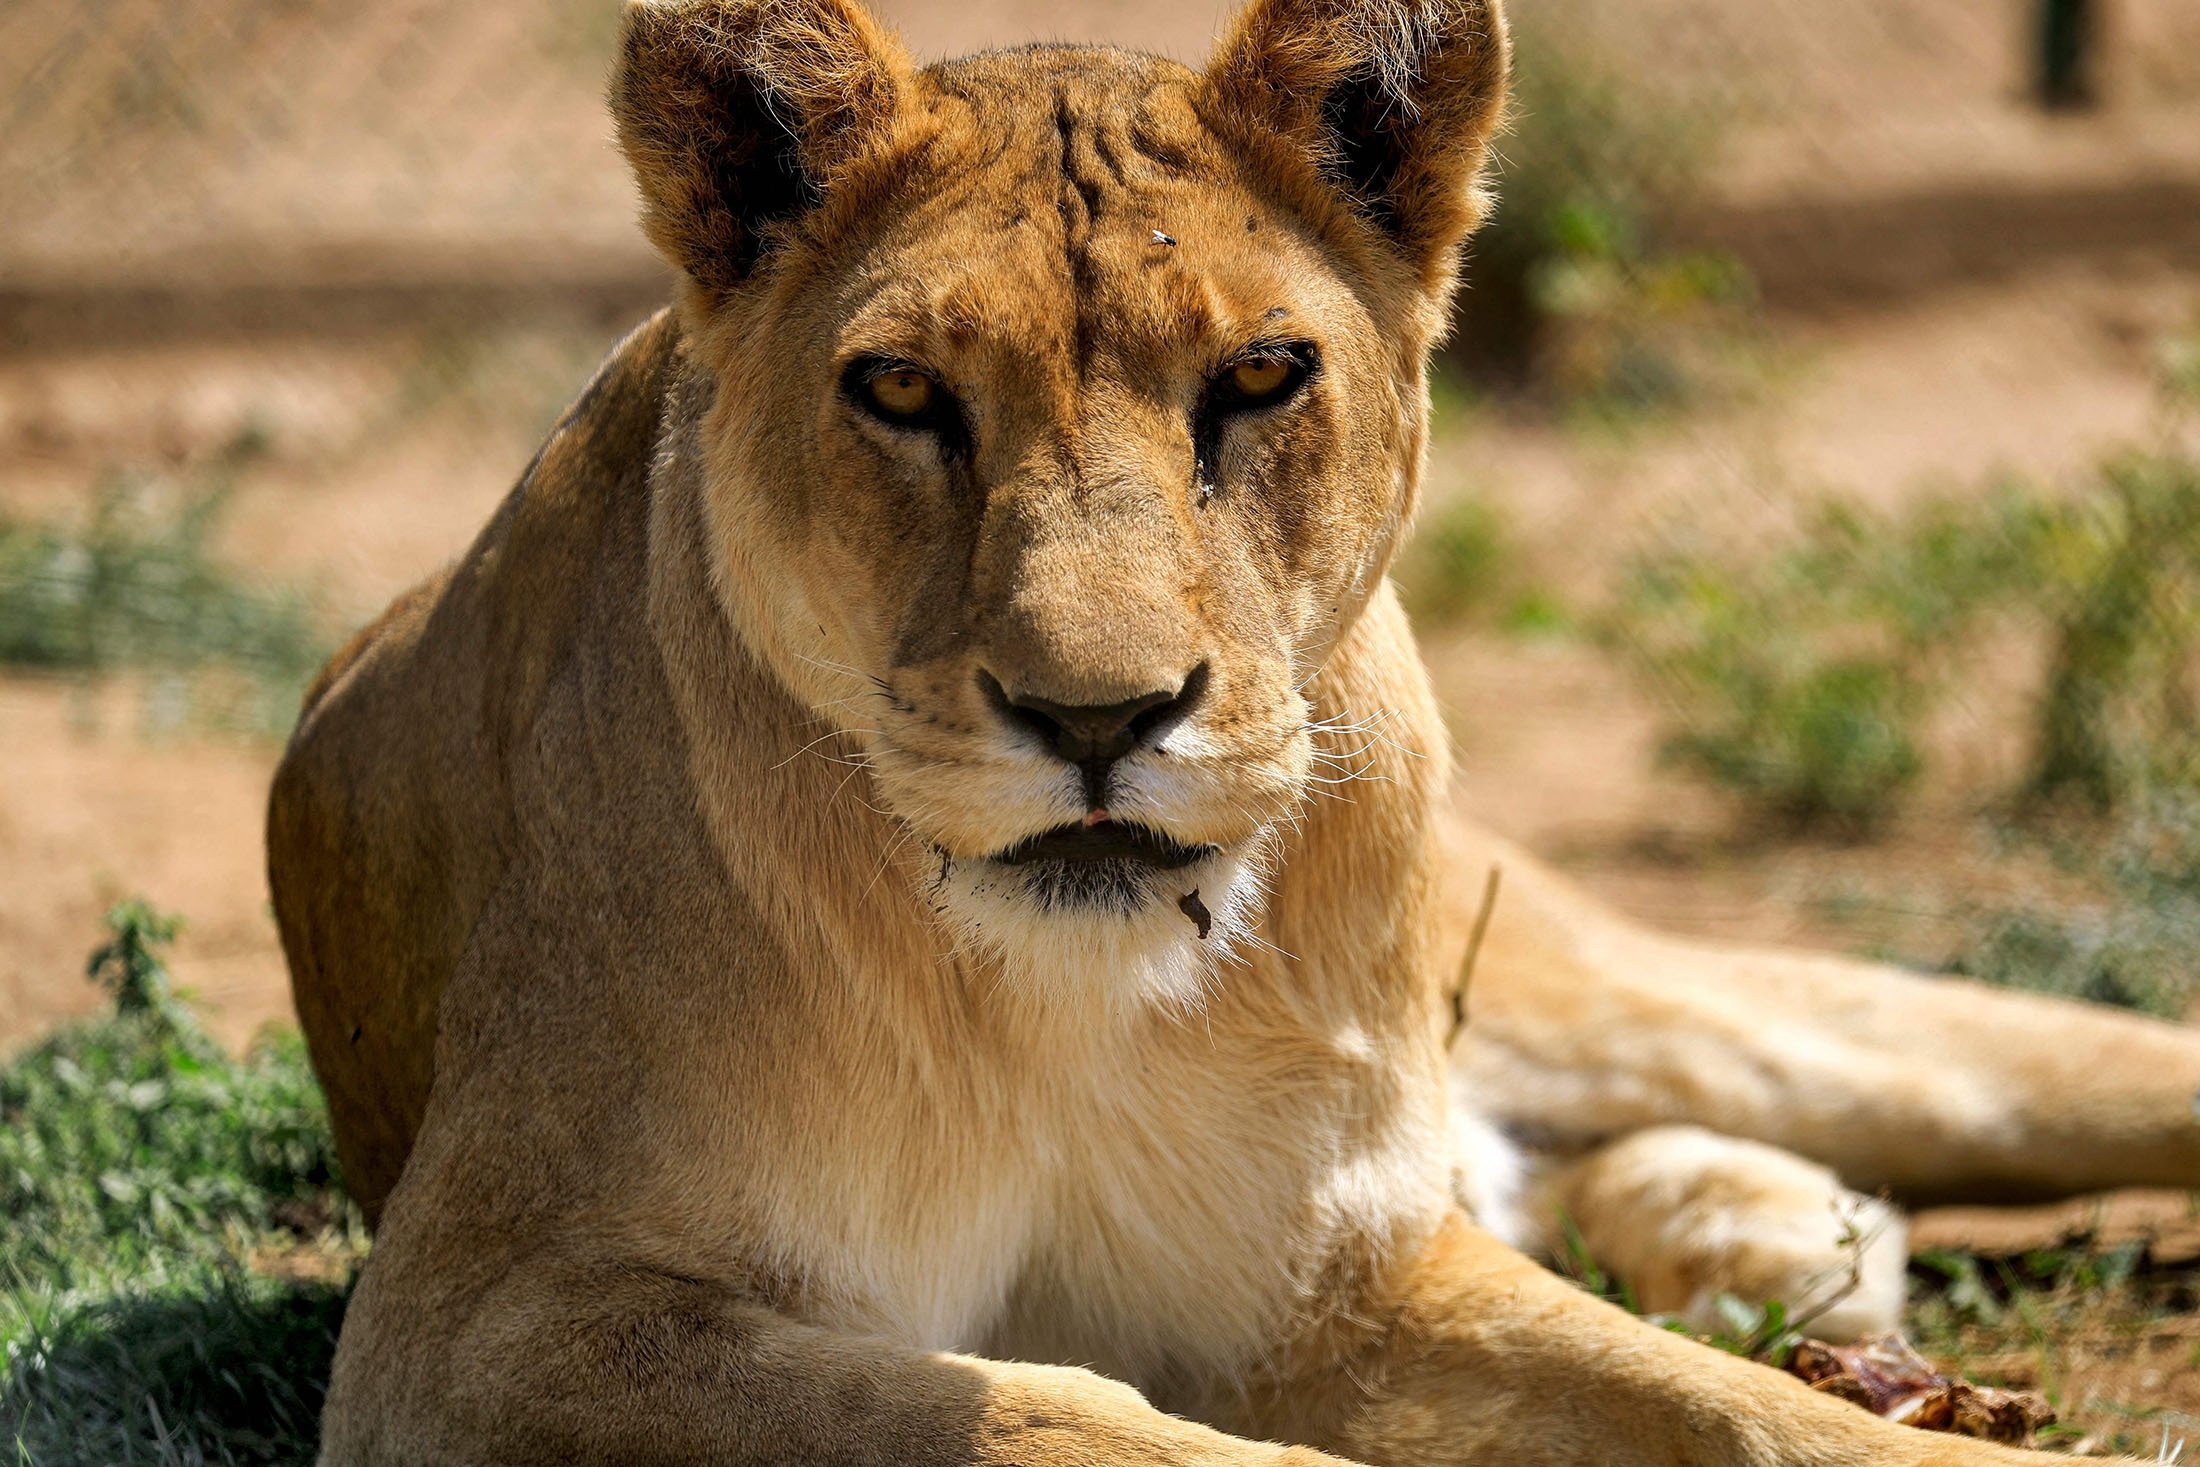 Lion Kings and Queens roar once again with life in Sudan sanctuary | Daily  Sabah